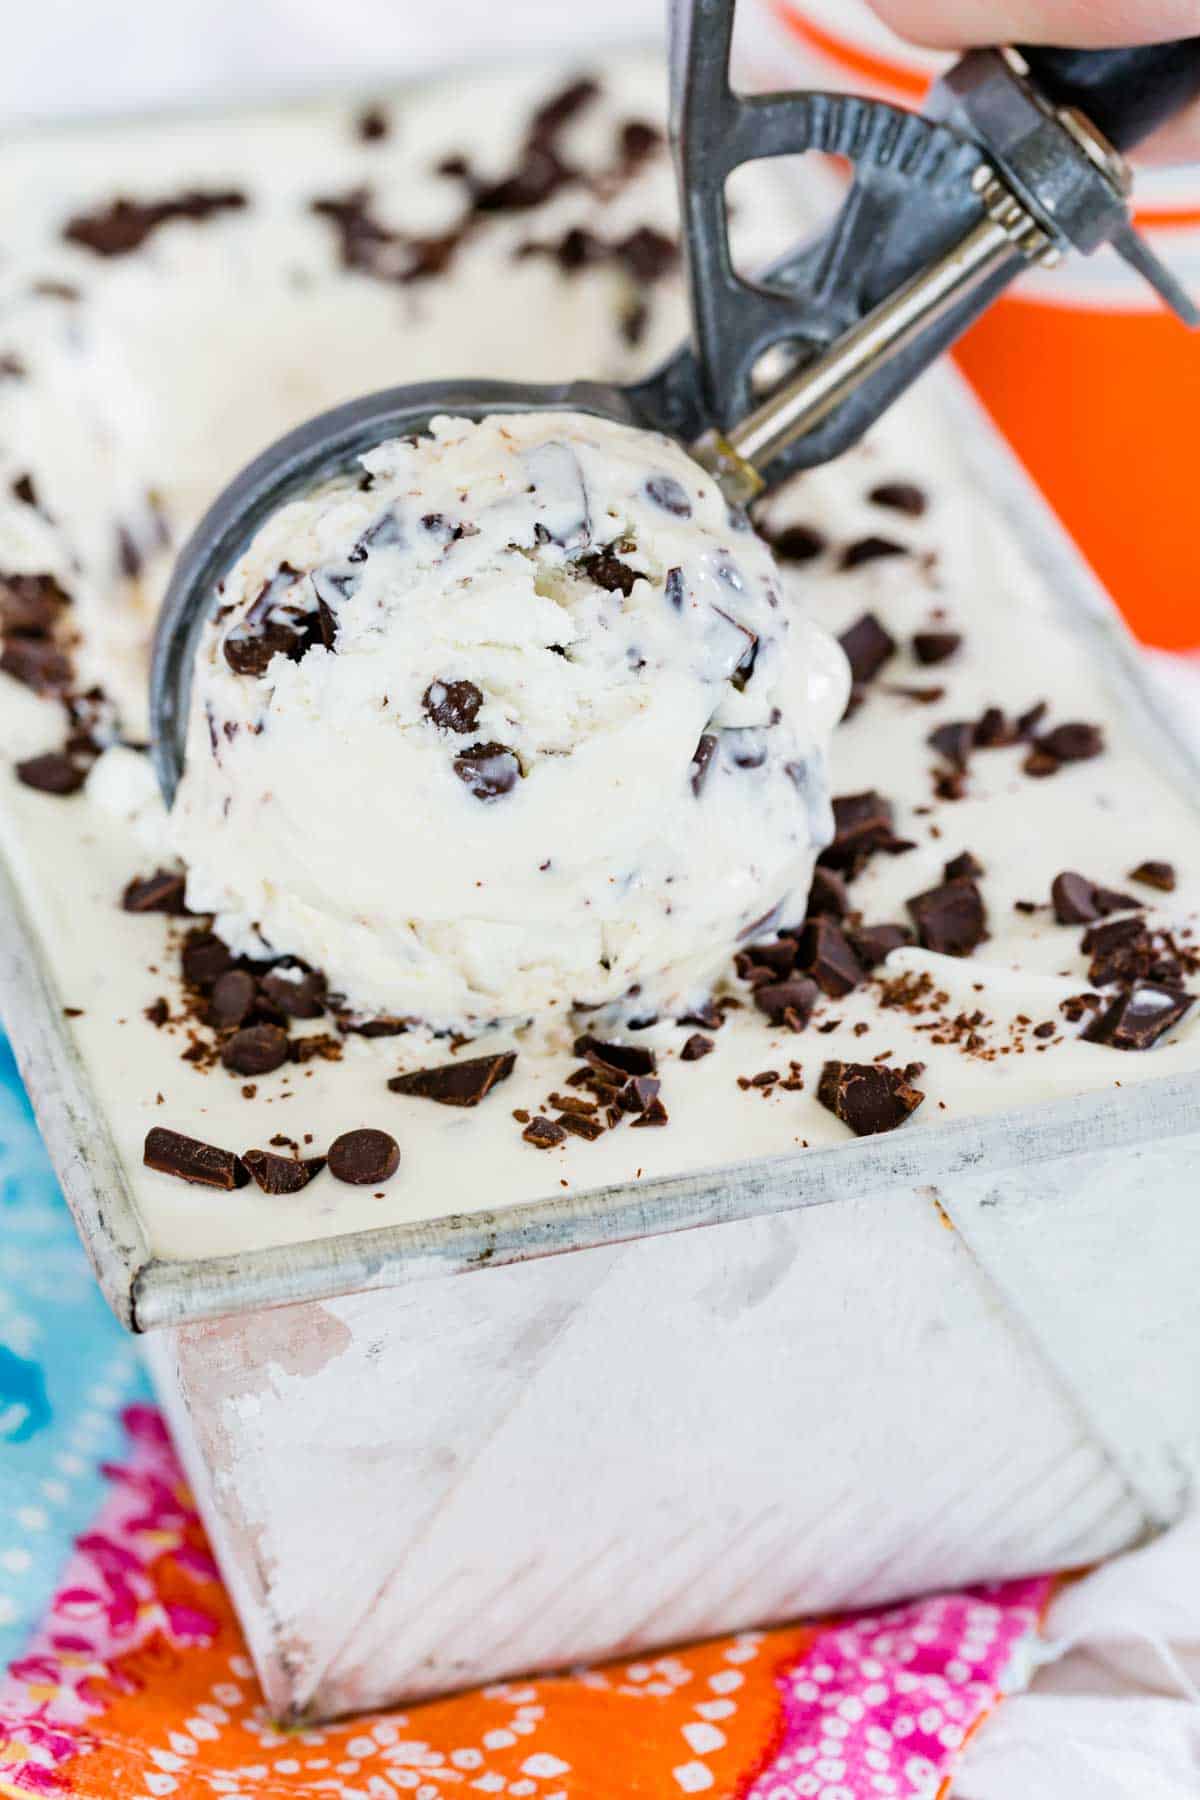 An ice cream scoop scoops out chocolate chip ice cream.